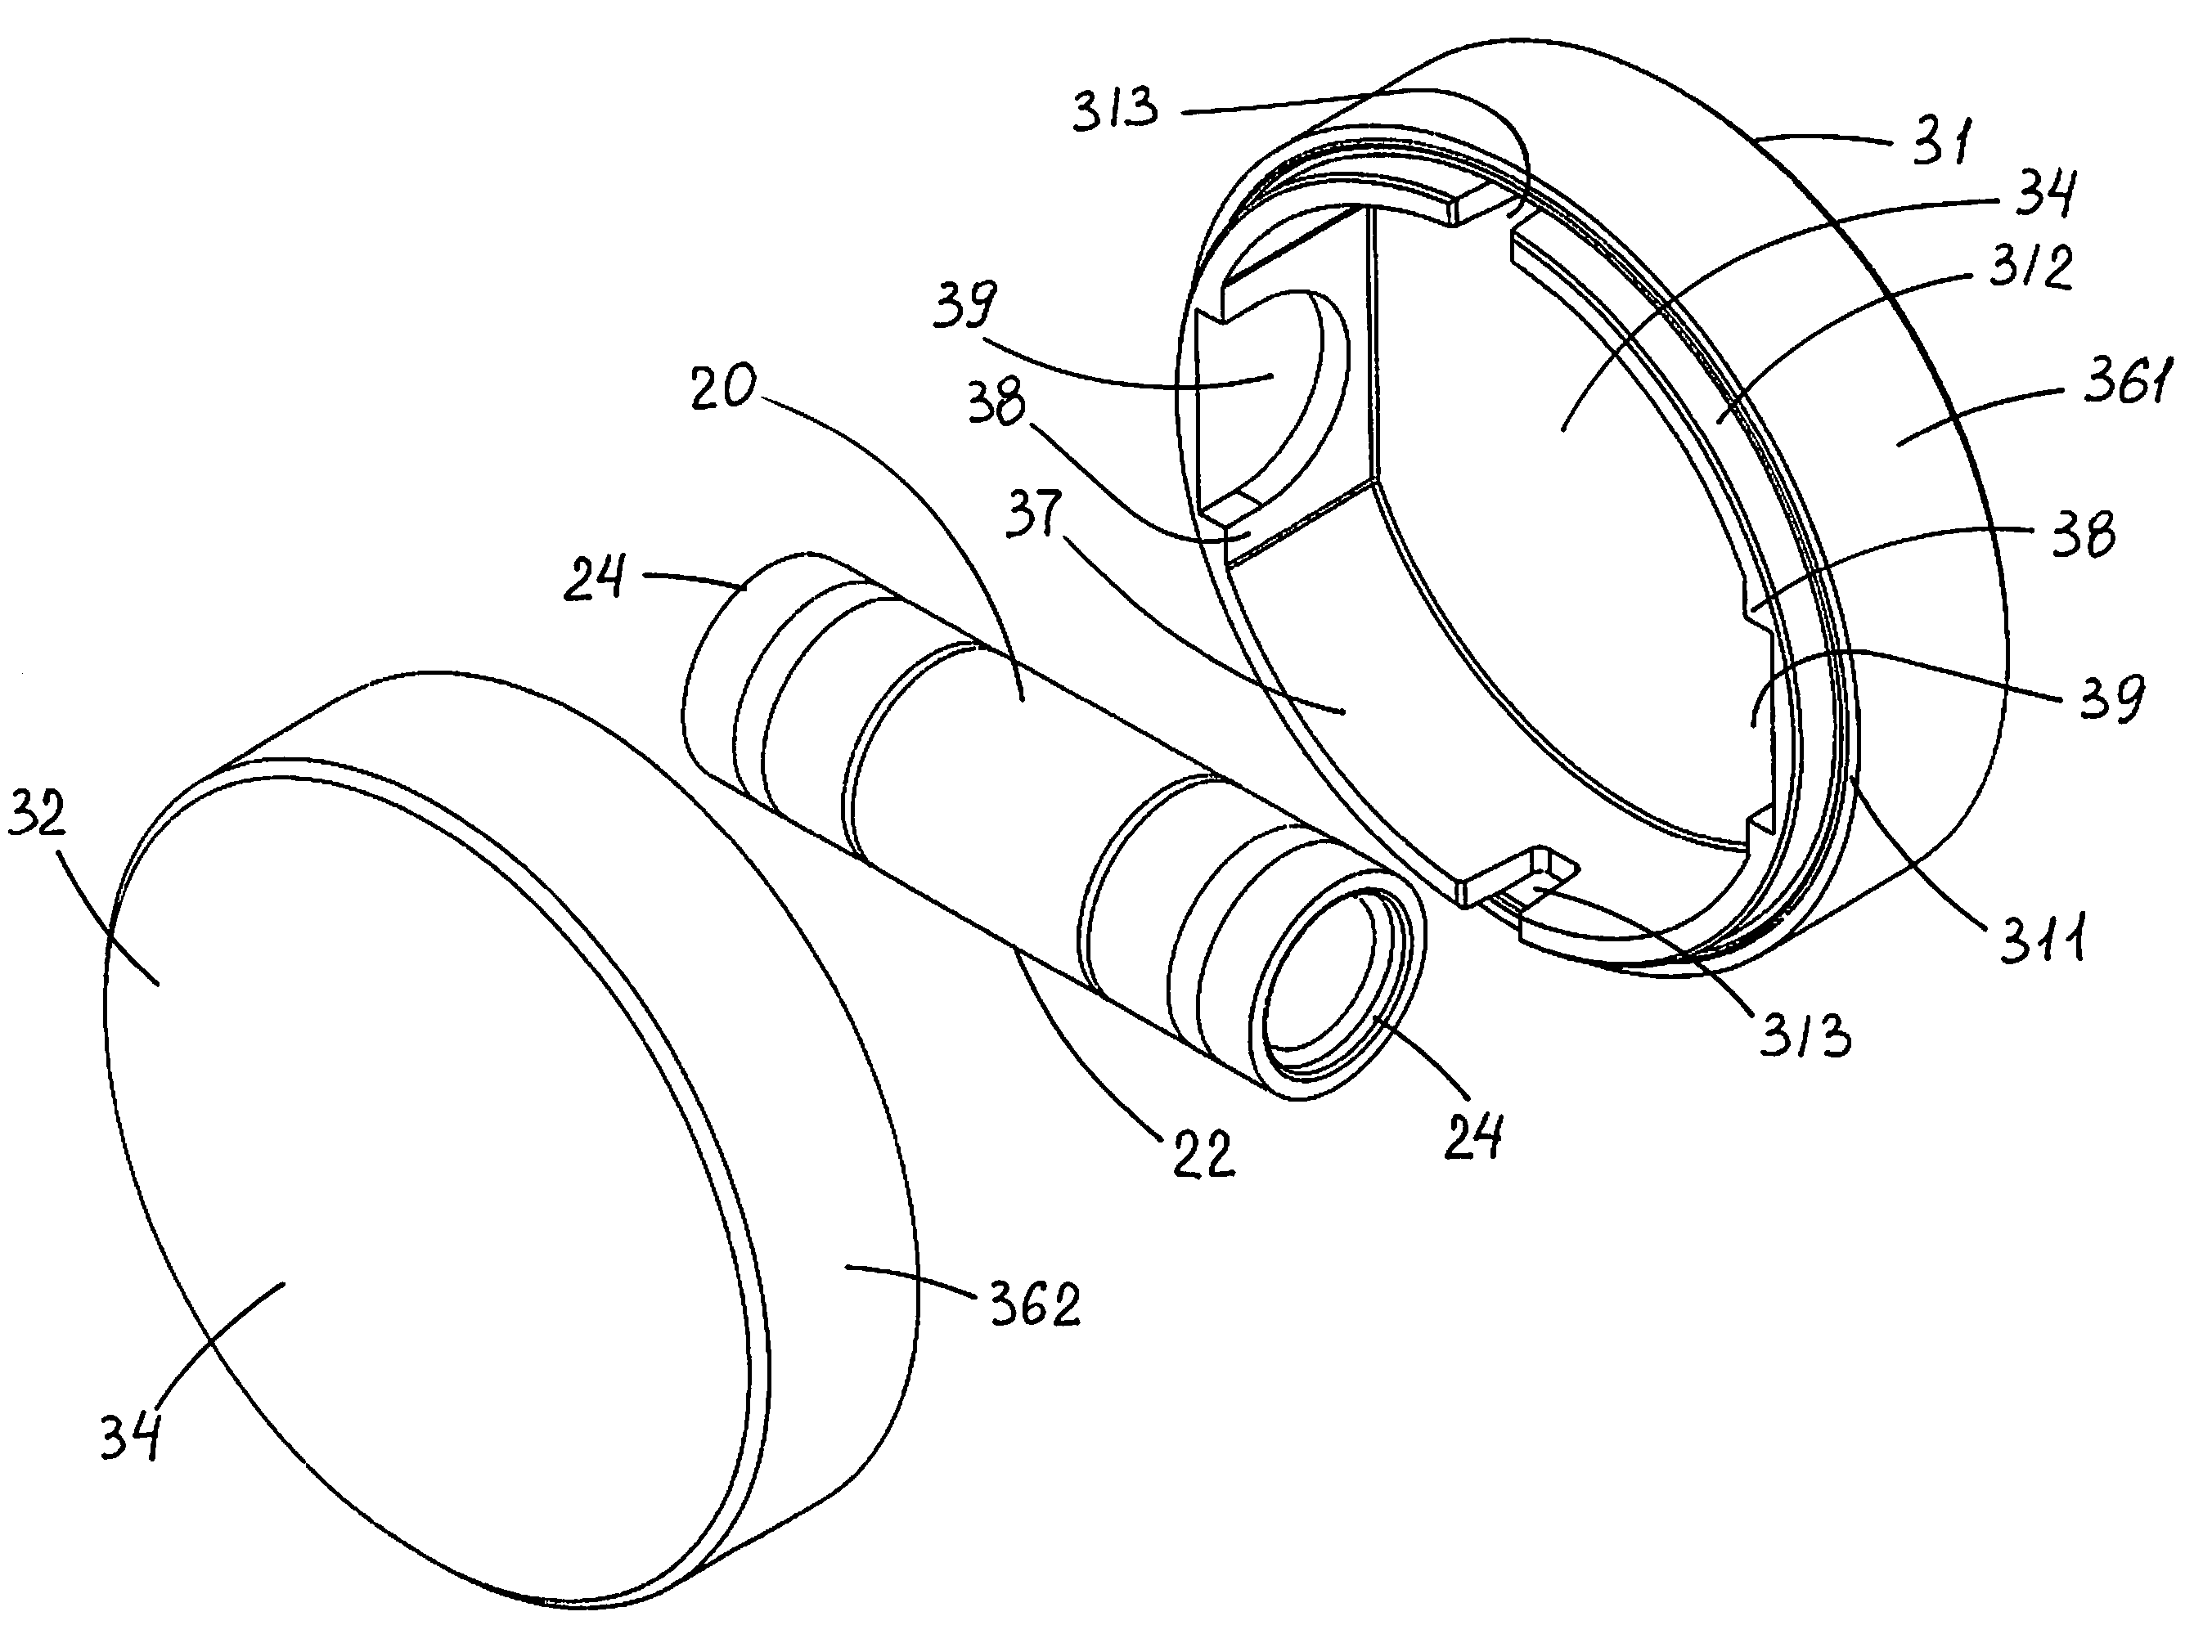 Casing mount for a cylindrical vial